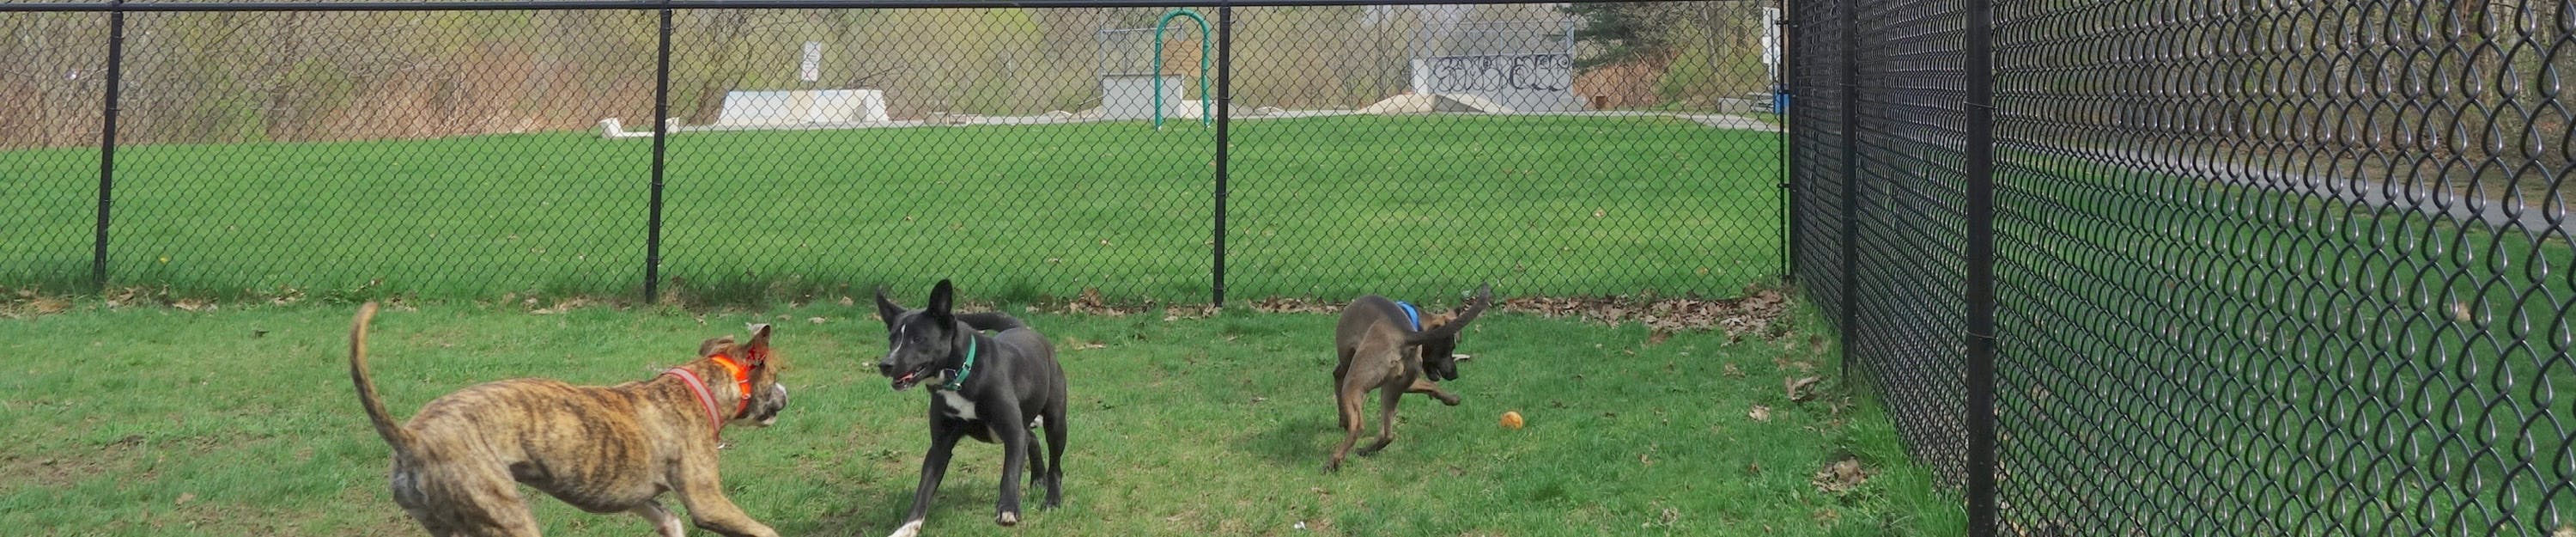 Decorative image of three dogs playing in a fenced-in off-leash area. 